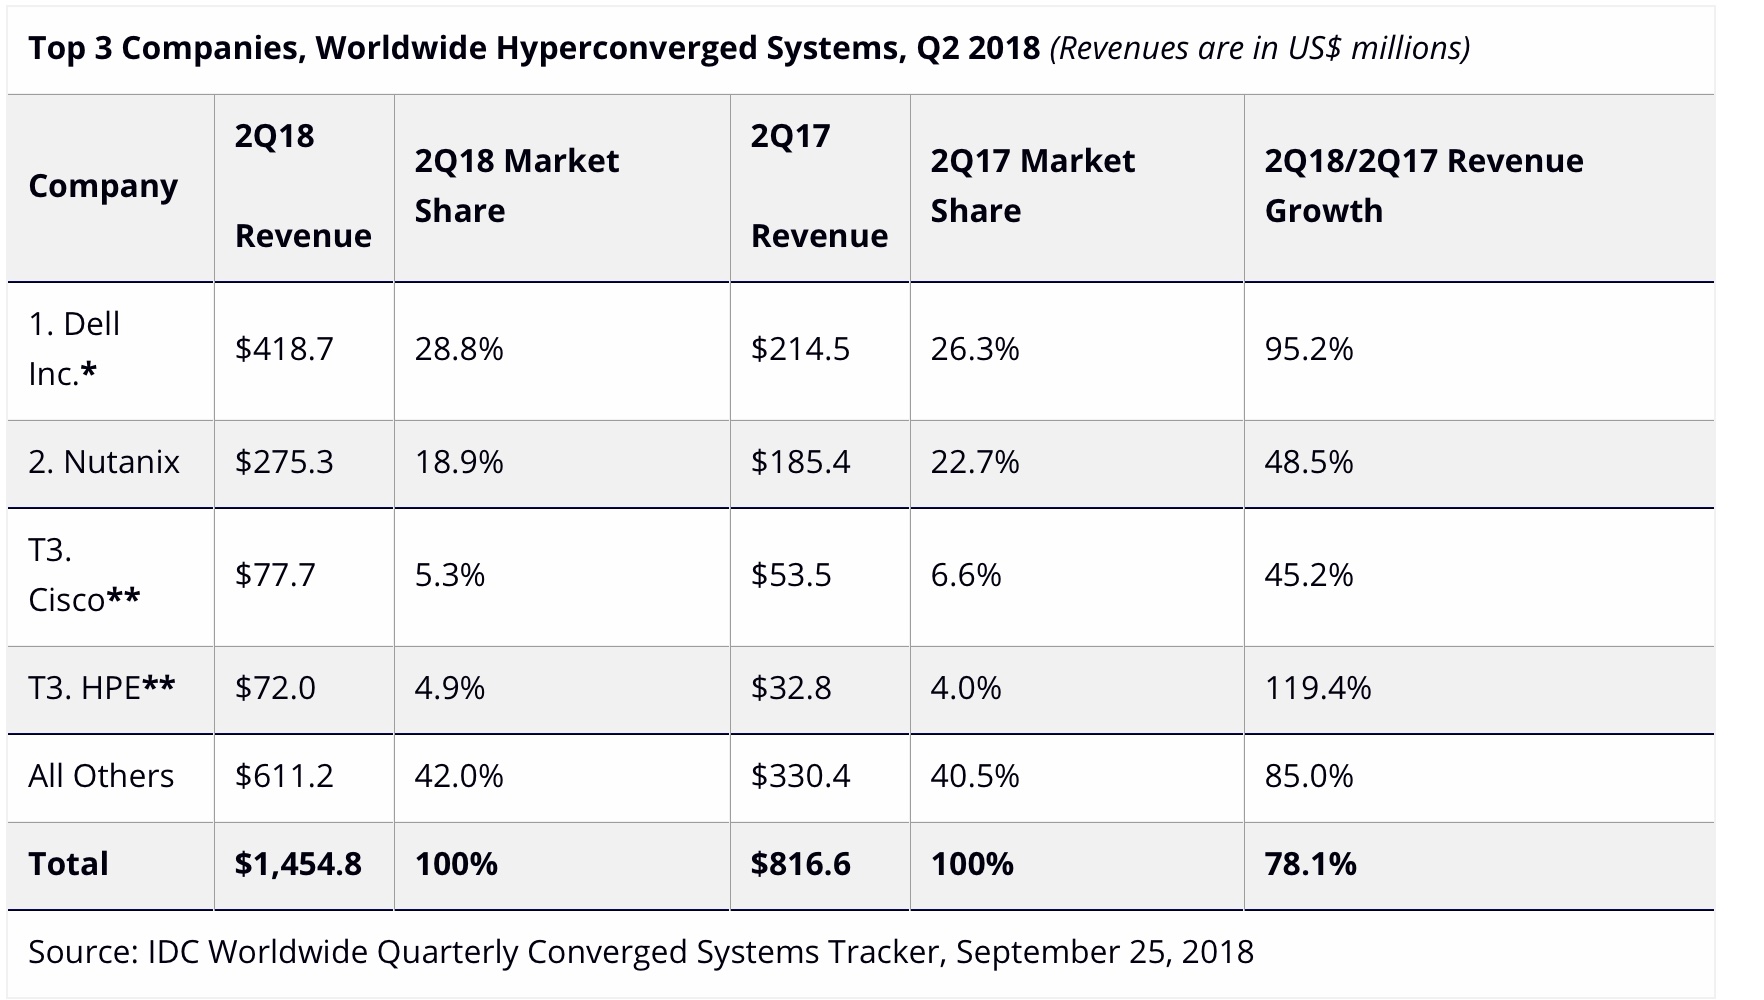 Converged systems revenue increased 9.9% year-over-year